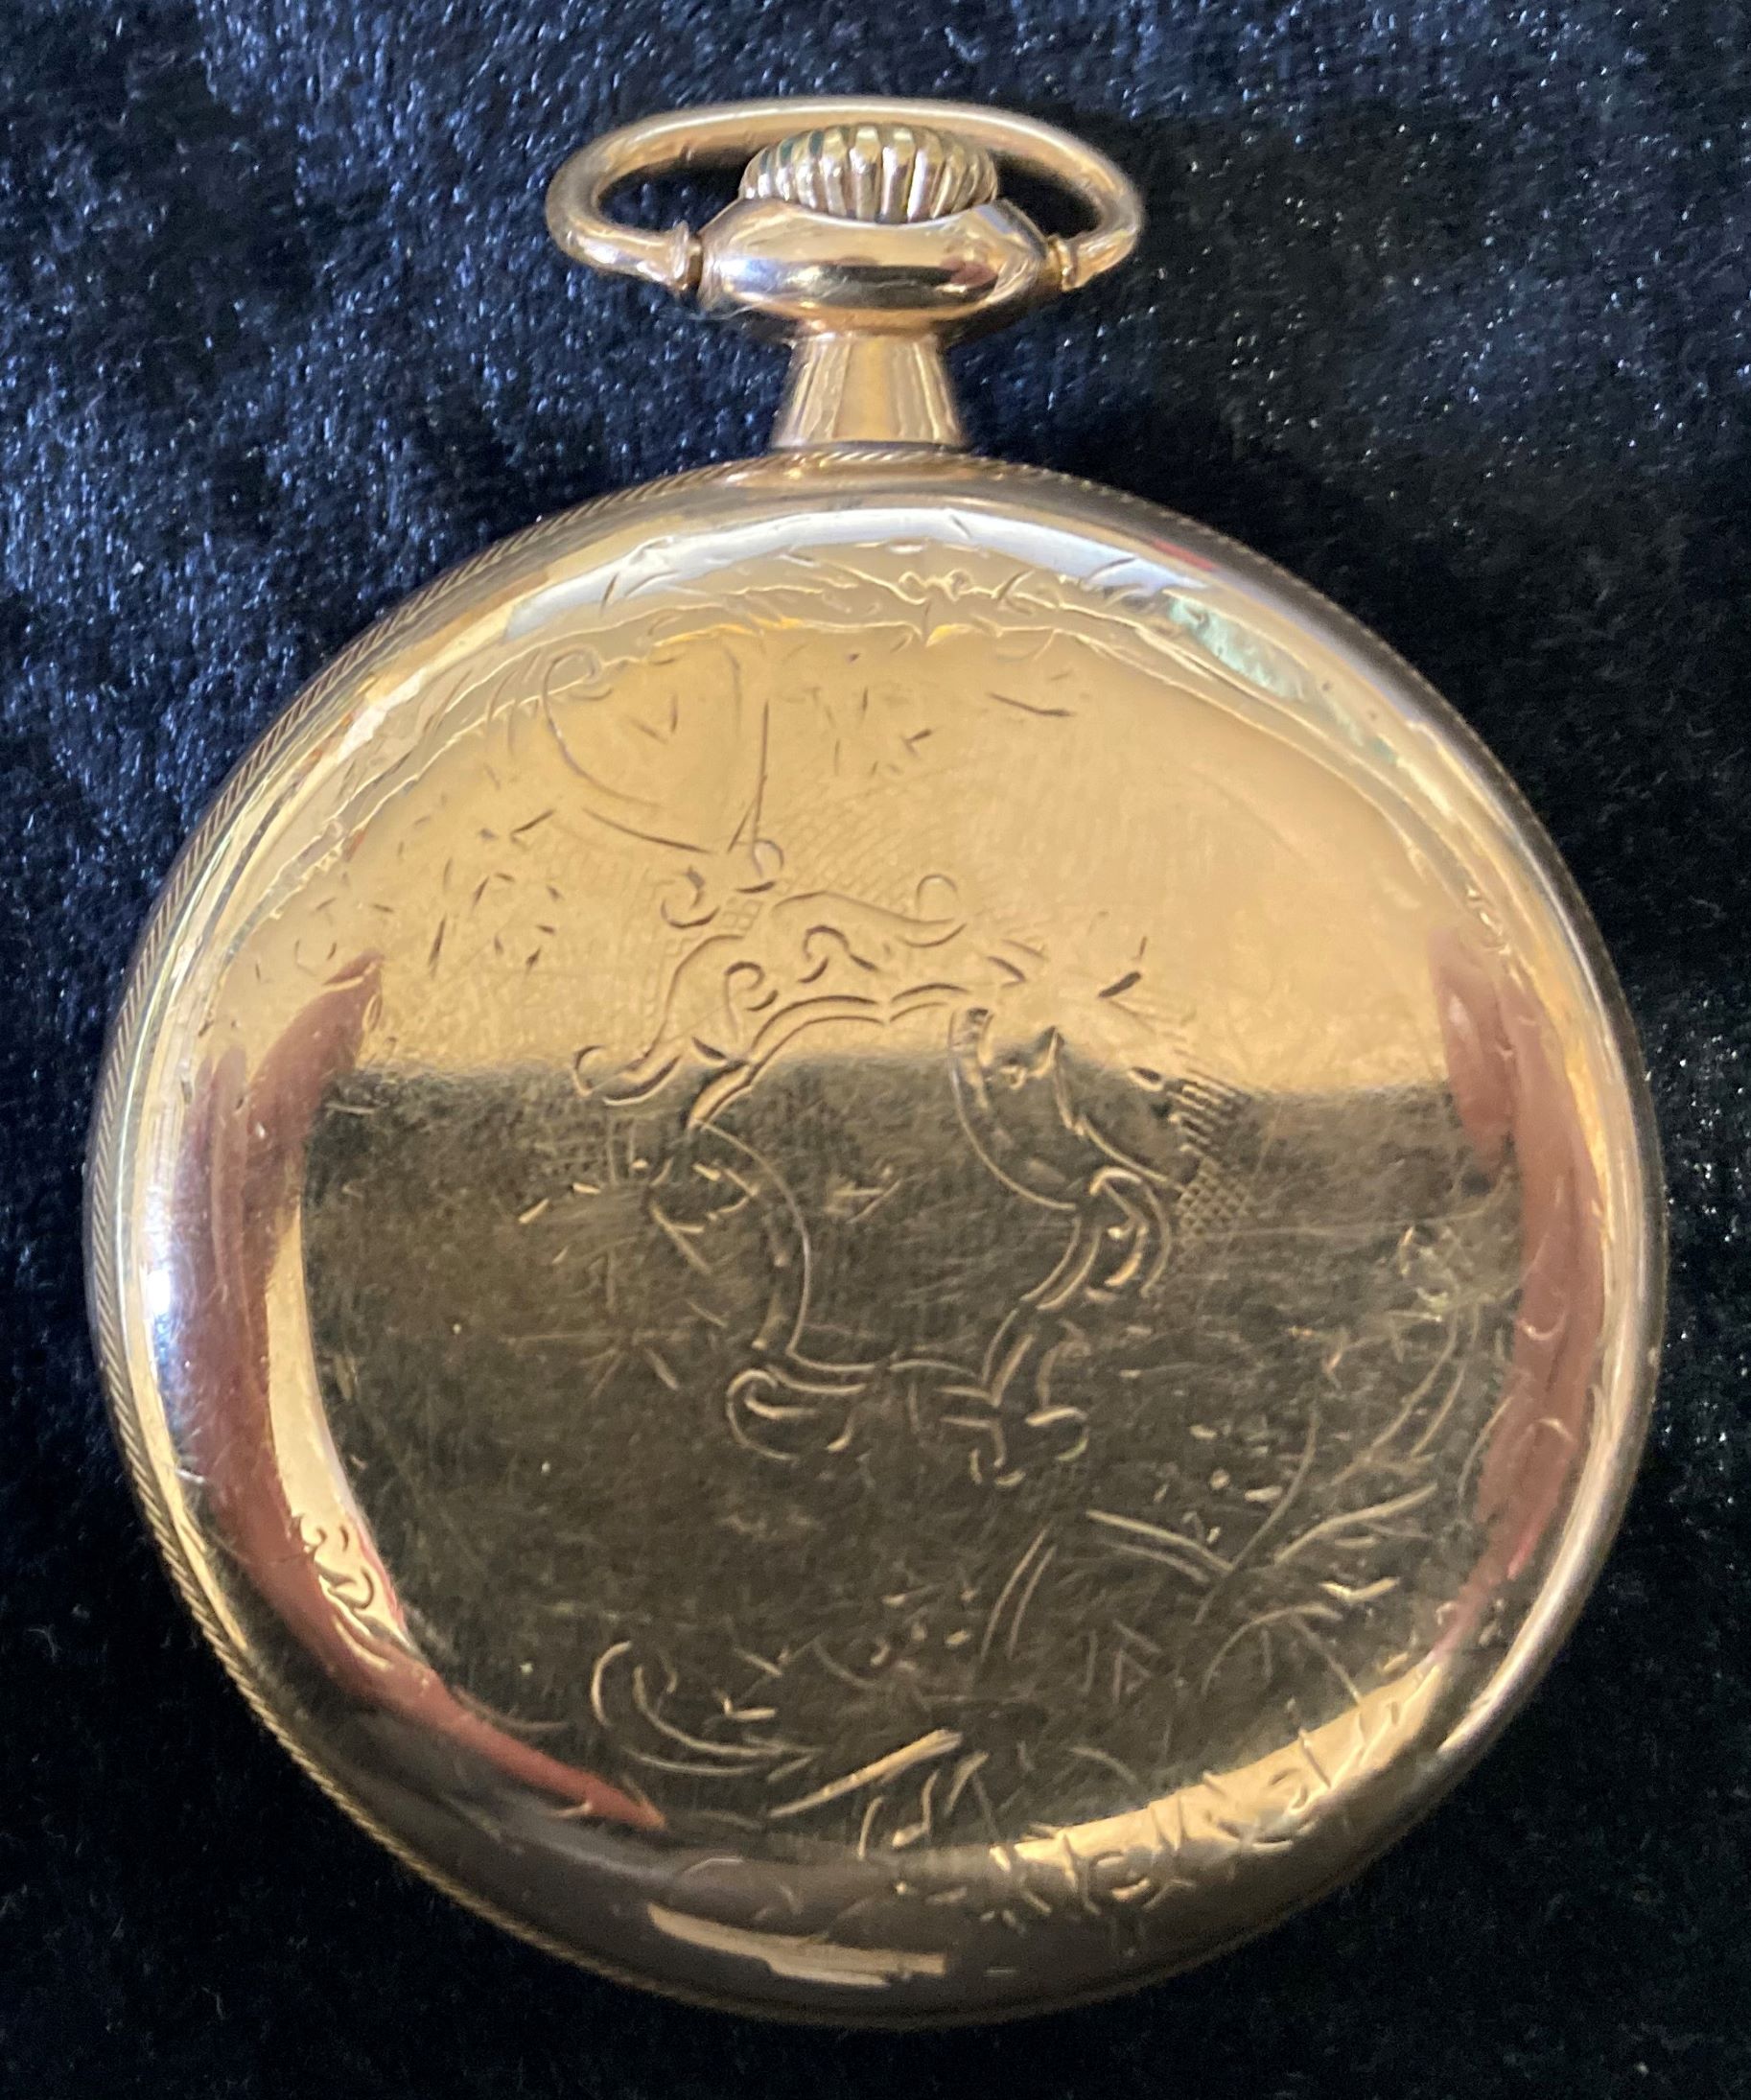 Hamilton Gold Plated Pocket Watch - Image 2 of 4